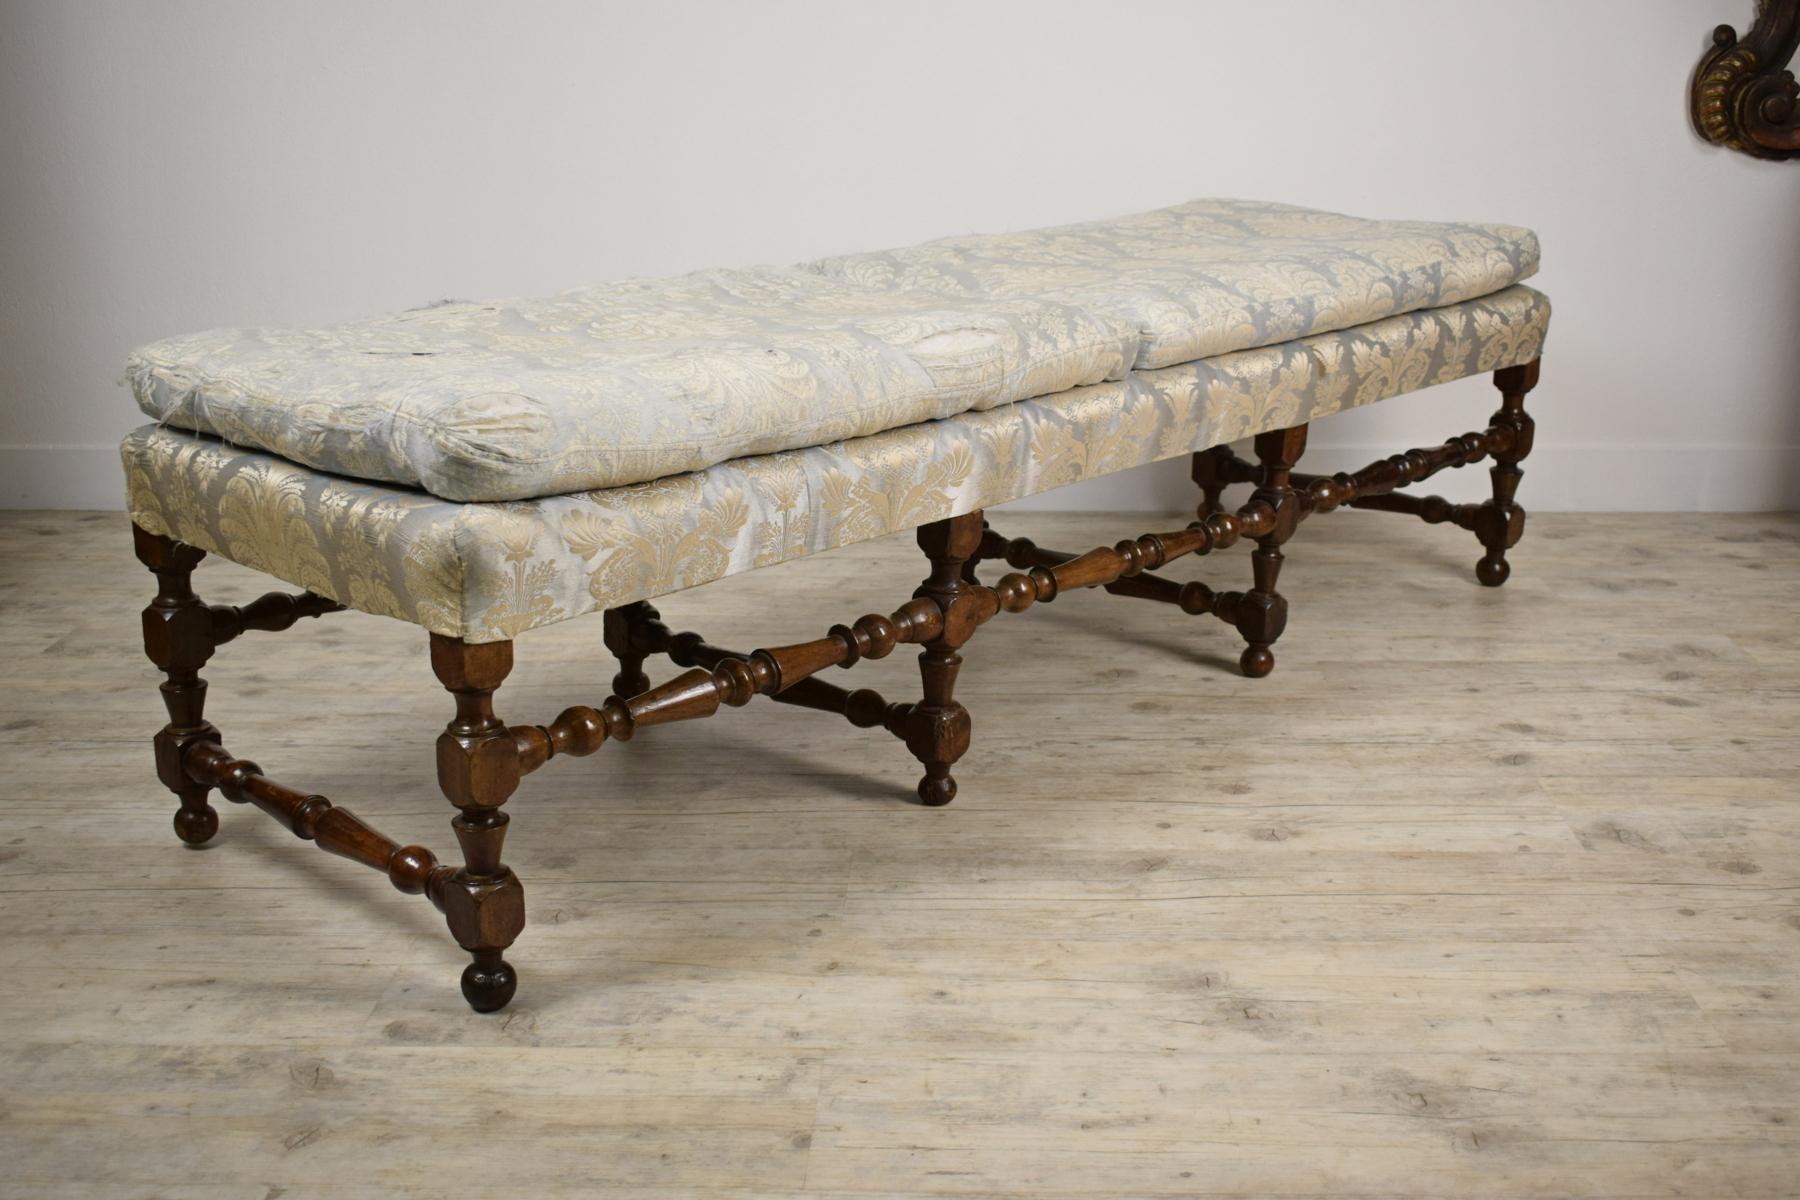 Long walnut wood Italian bench, made in the north of Italy (Piedmont), from 19th century.
This exquisite bench features a long rectangular seat covered, eight barley twist legs with rectangular block joints, connected to one another through side